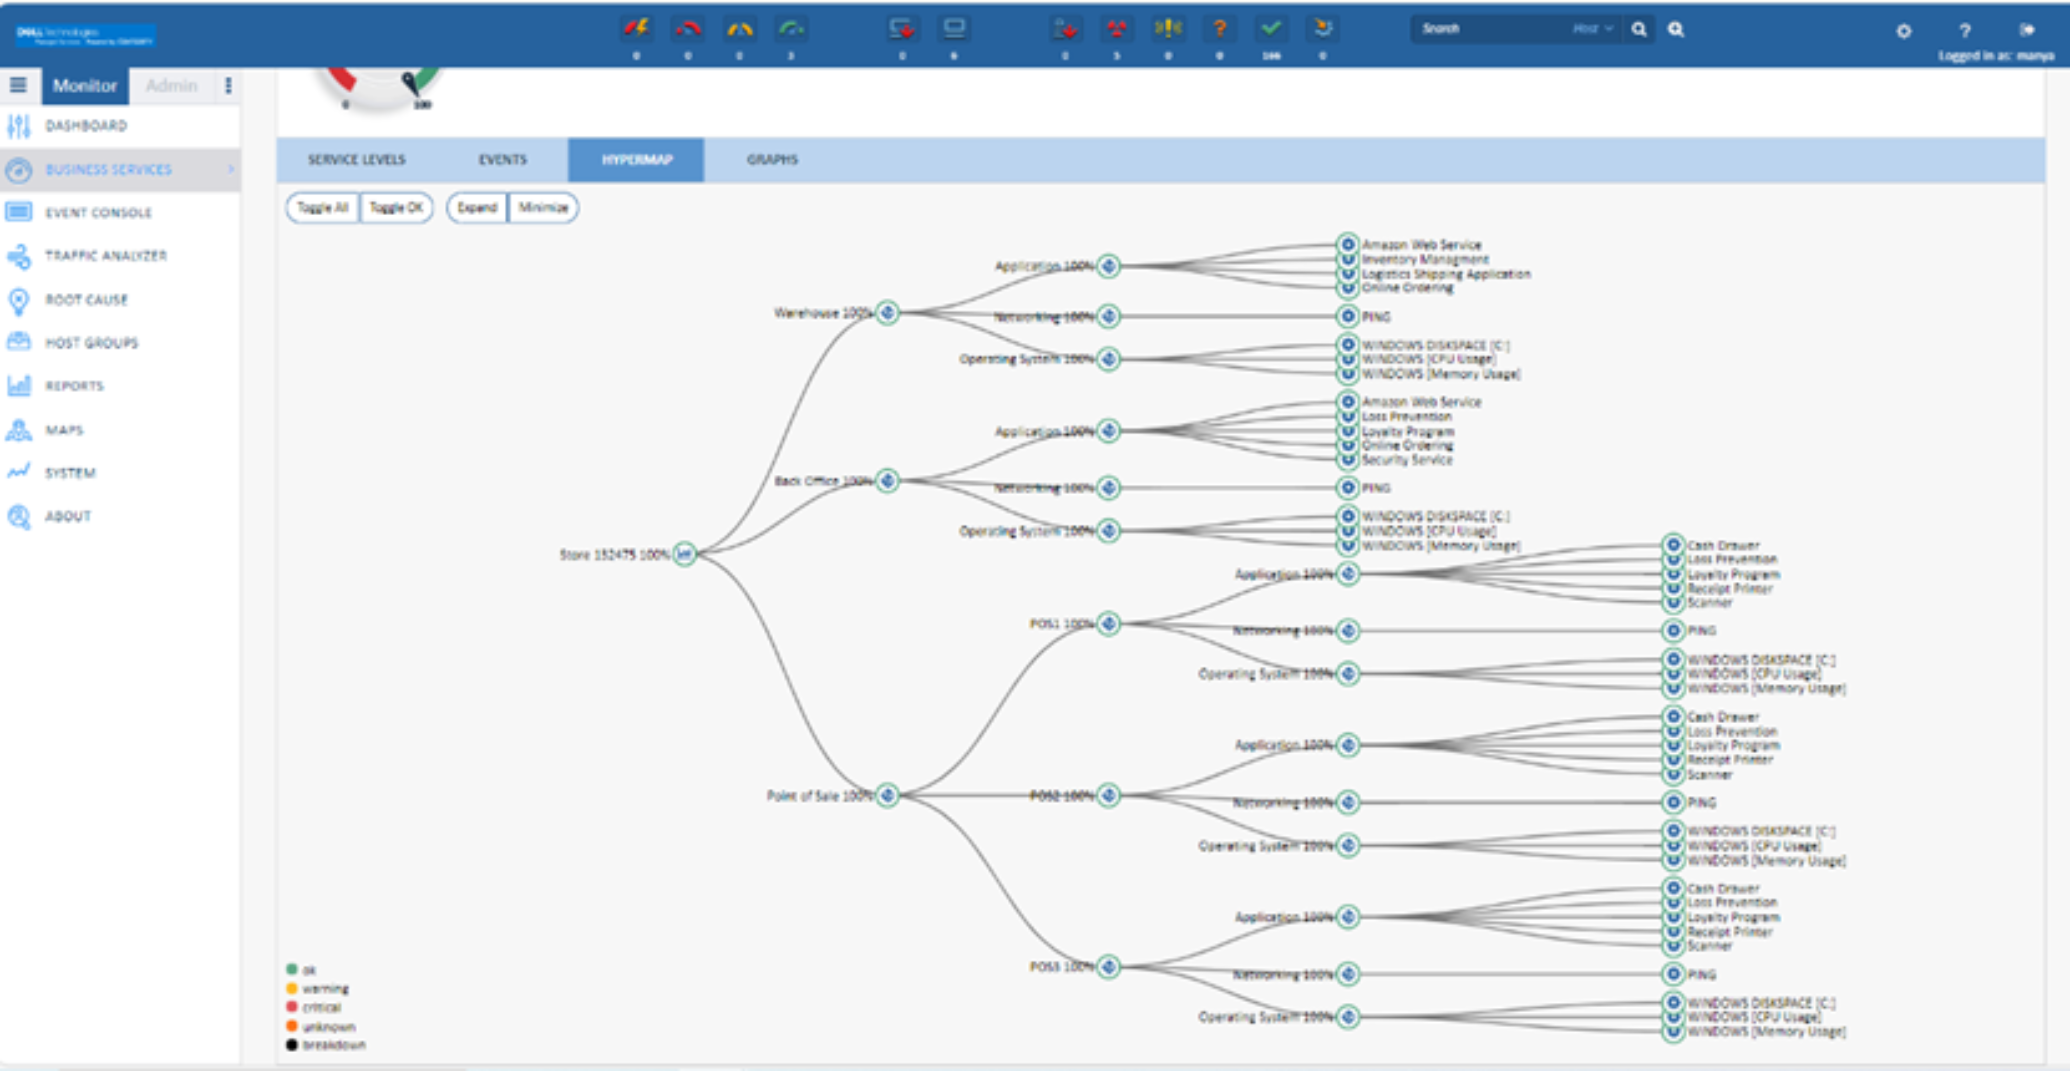 Centerity Software Dashboard showing Hypermap: the relationship between applications, network, and other variables.